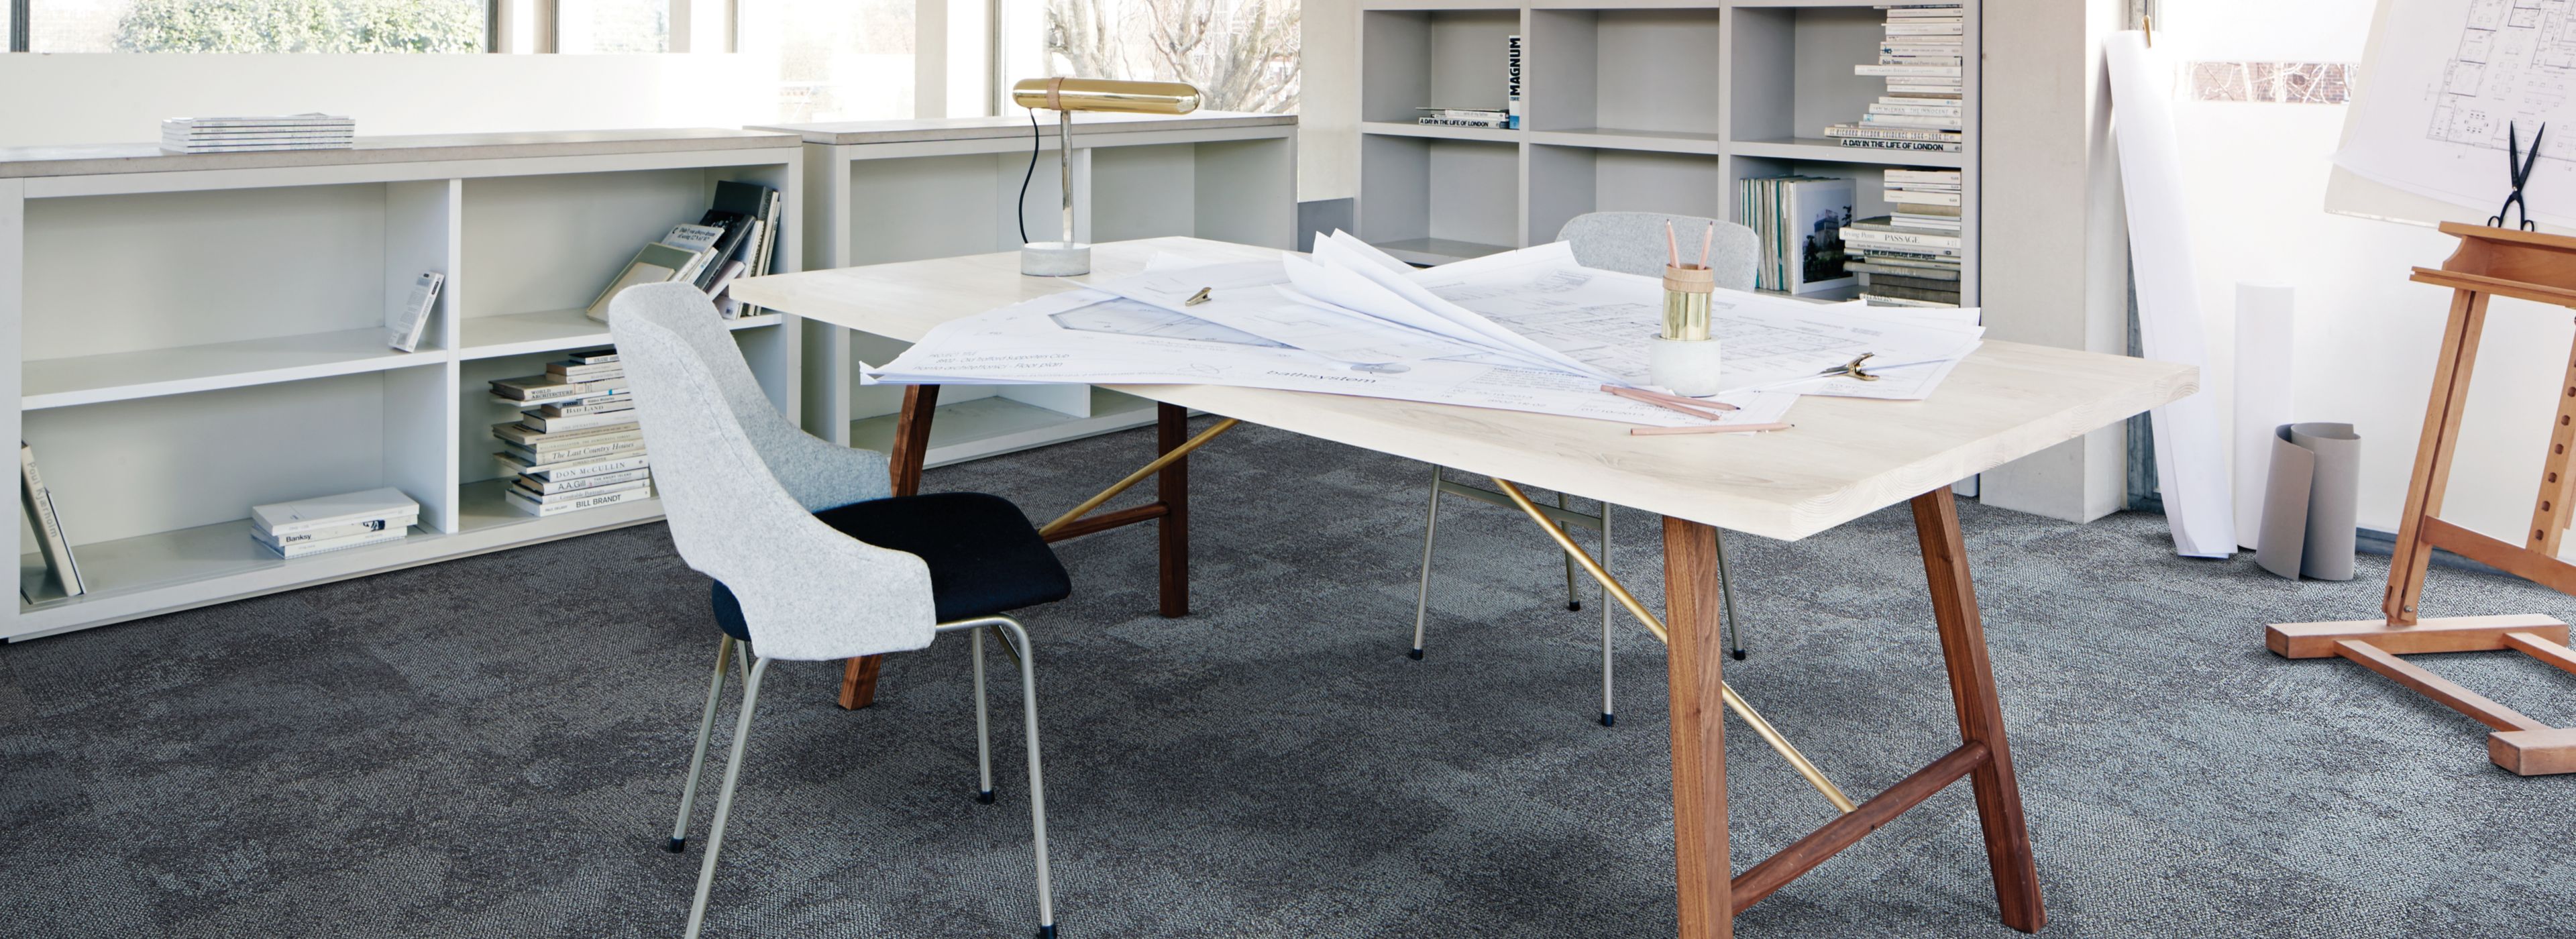 Interface Composure carpet tile with white table and architectural drawings afbeeldingnummer 1